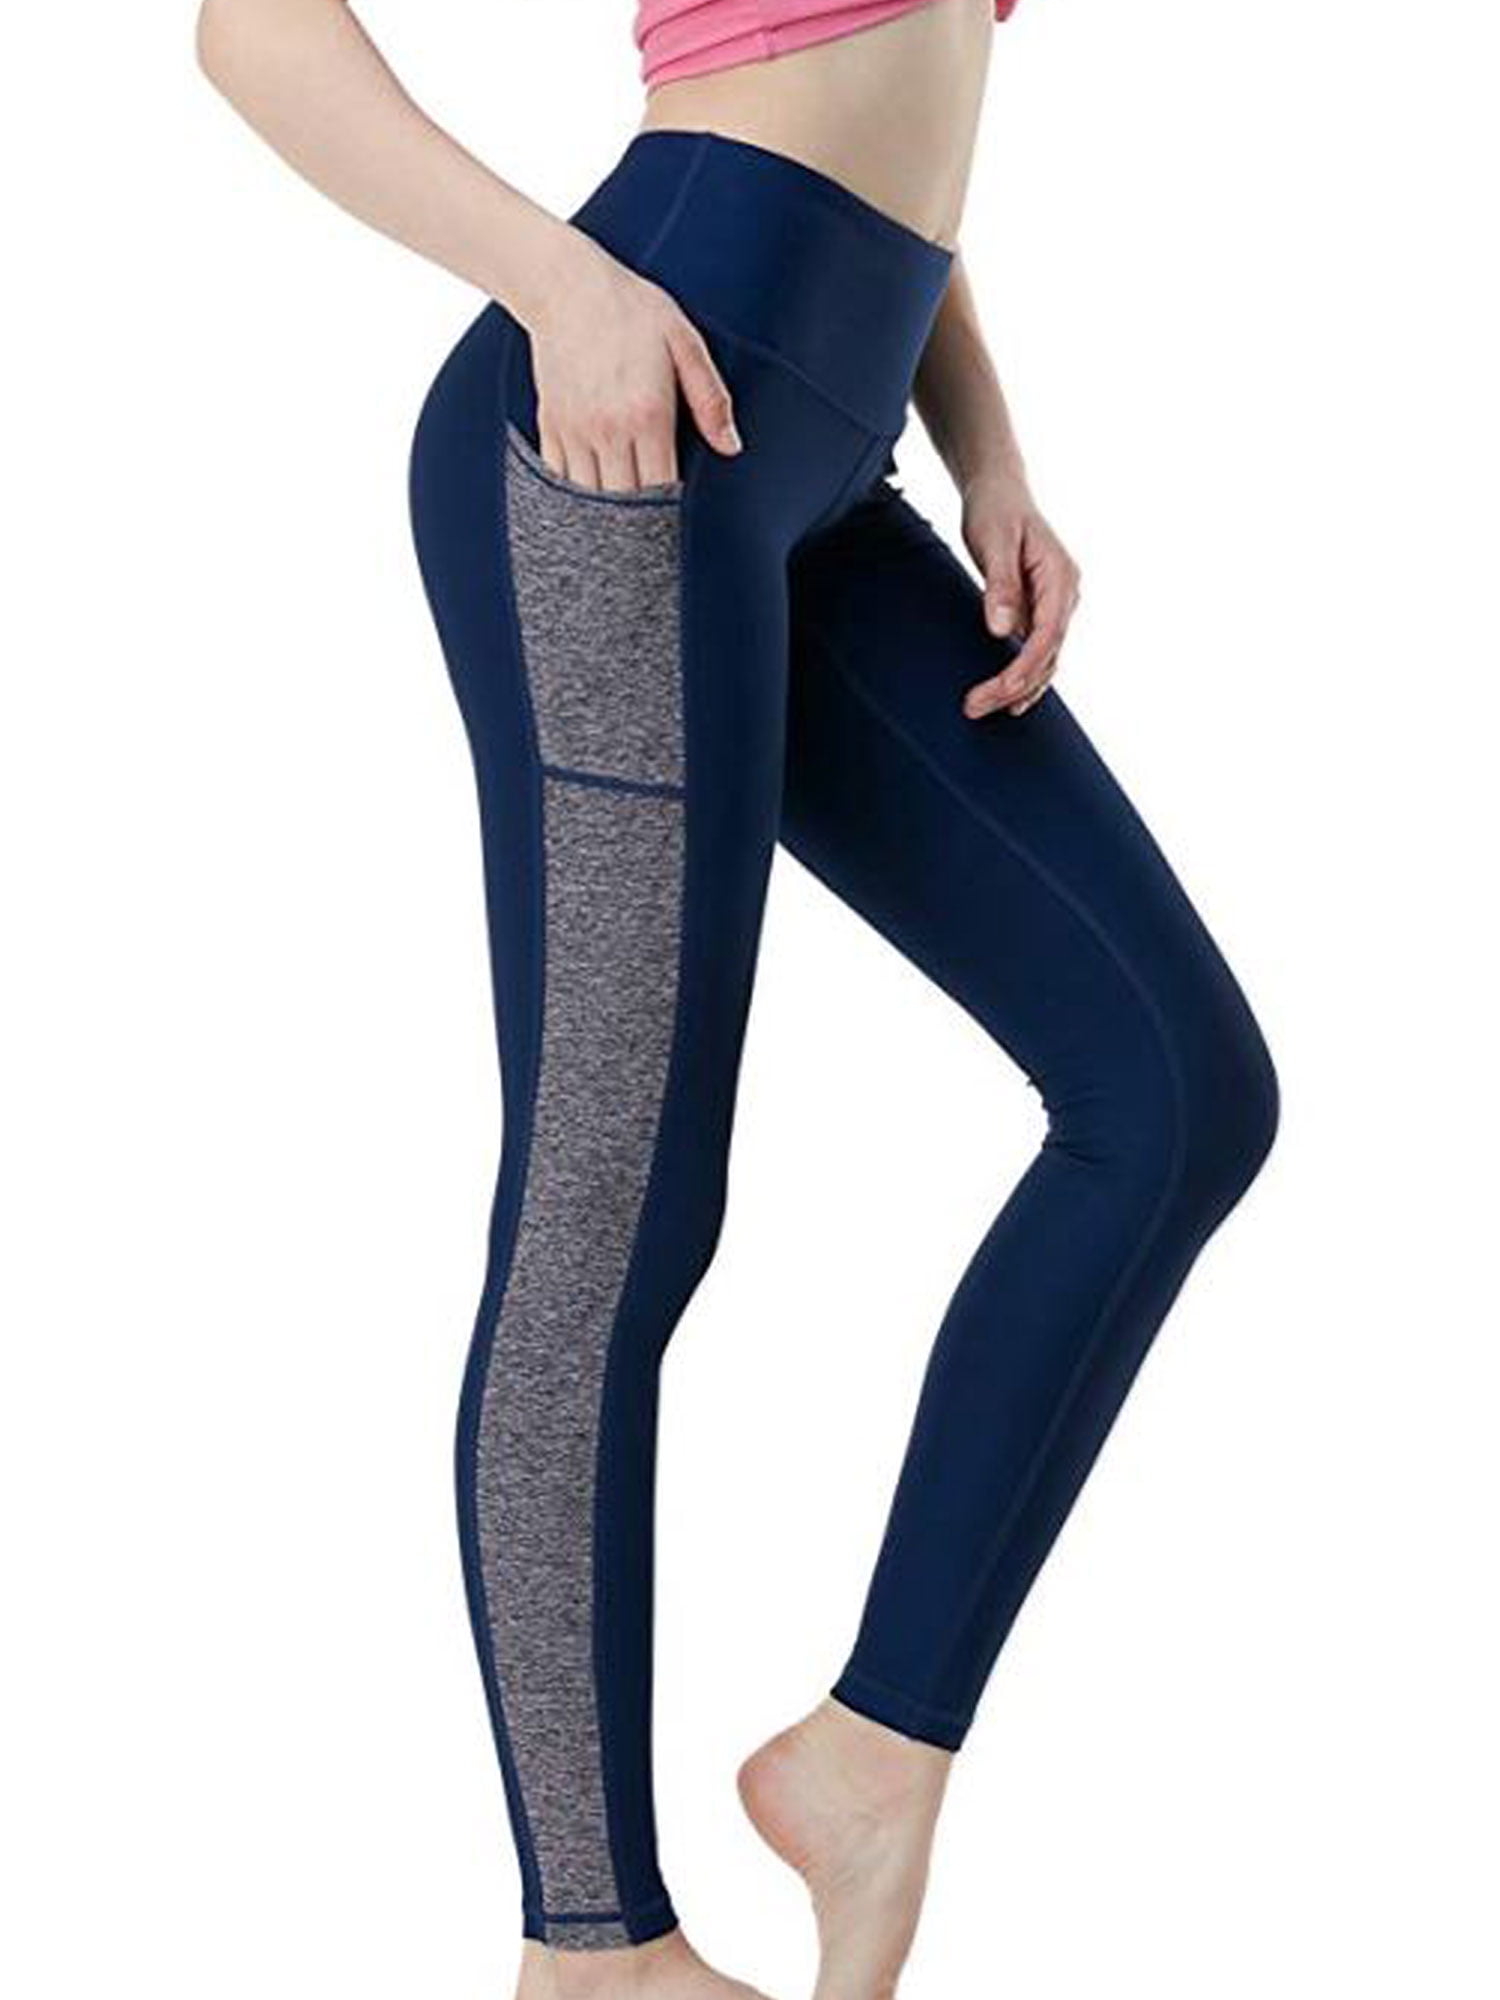 Women Yoga Pants Colourful Workout Gym Sports Running Leggings Fitness Clothing termal Tights Trousers